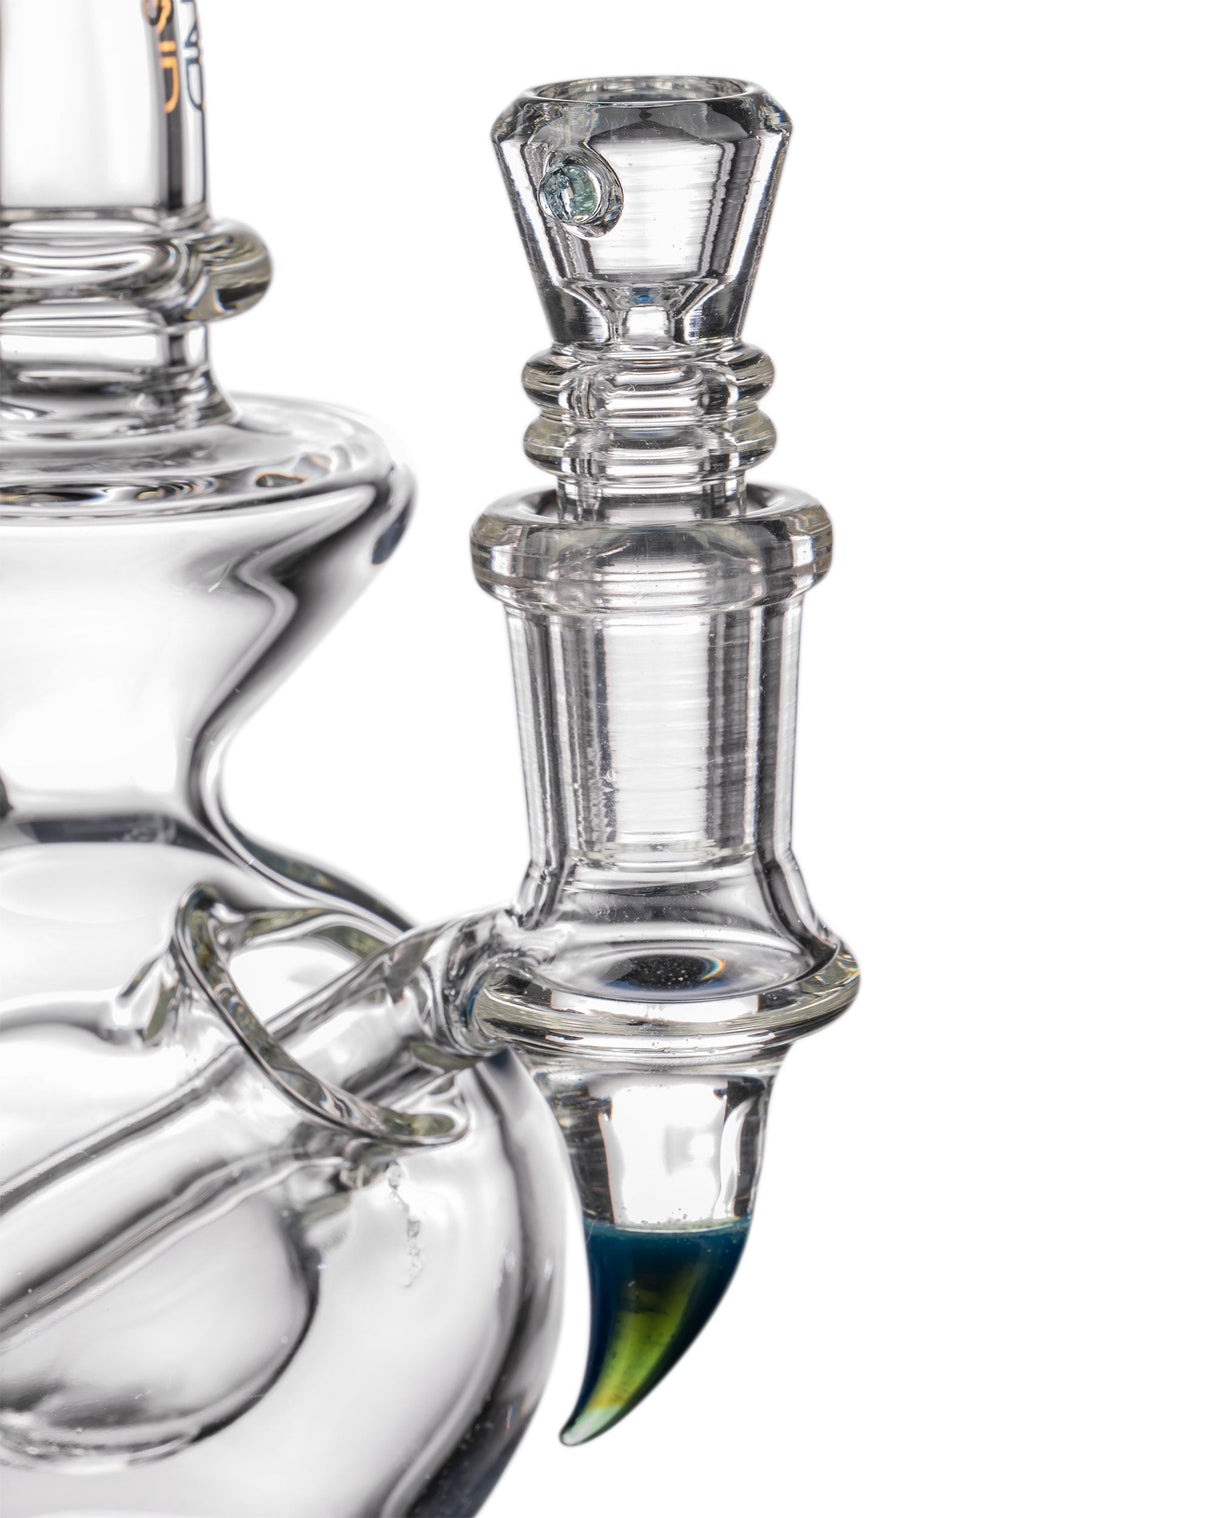 Diamond Glass Rigception Incycler with Showerhead Perc, Blue Accents, Close-up Side View